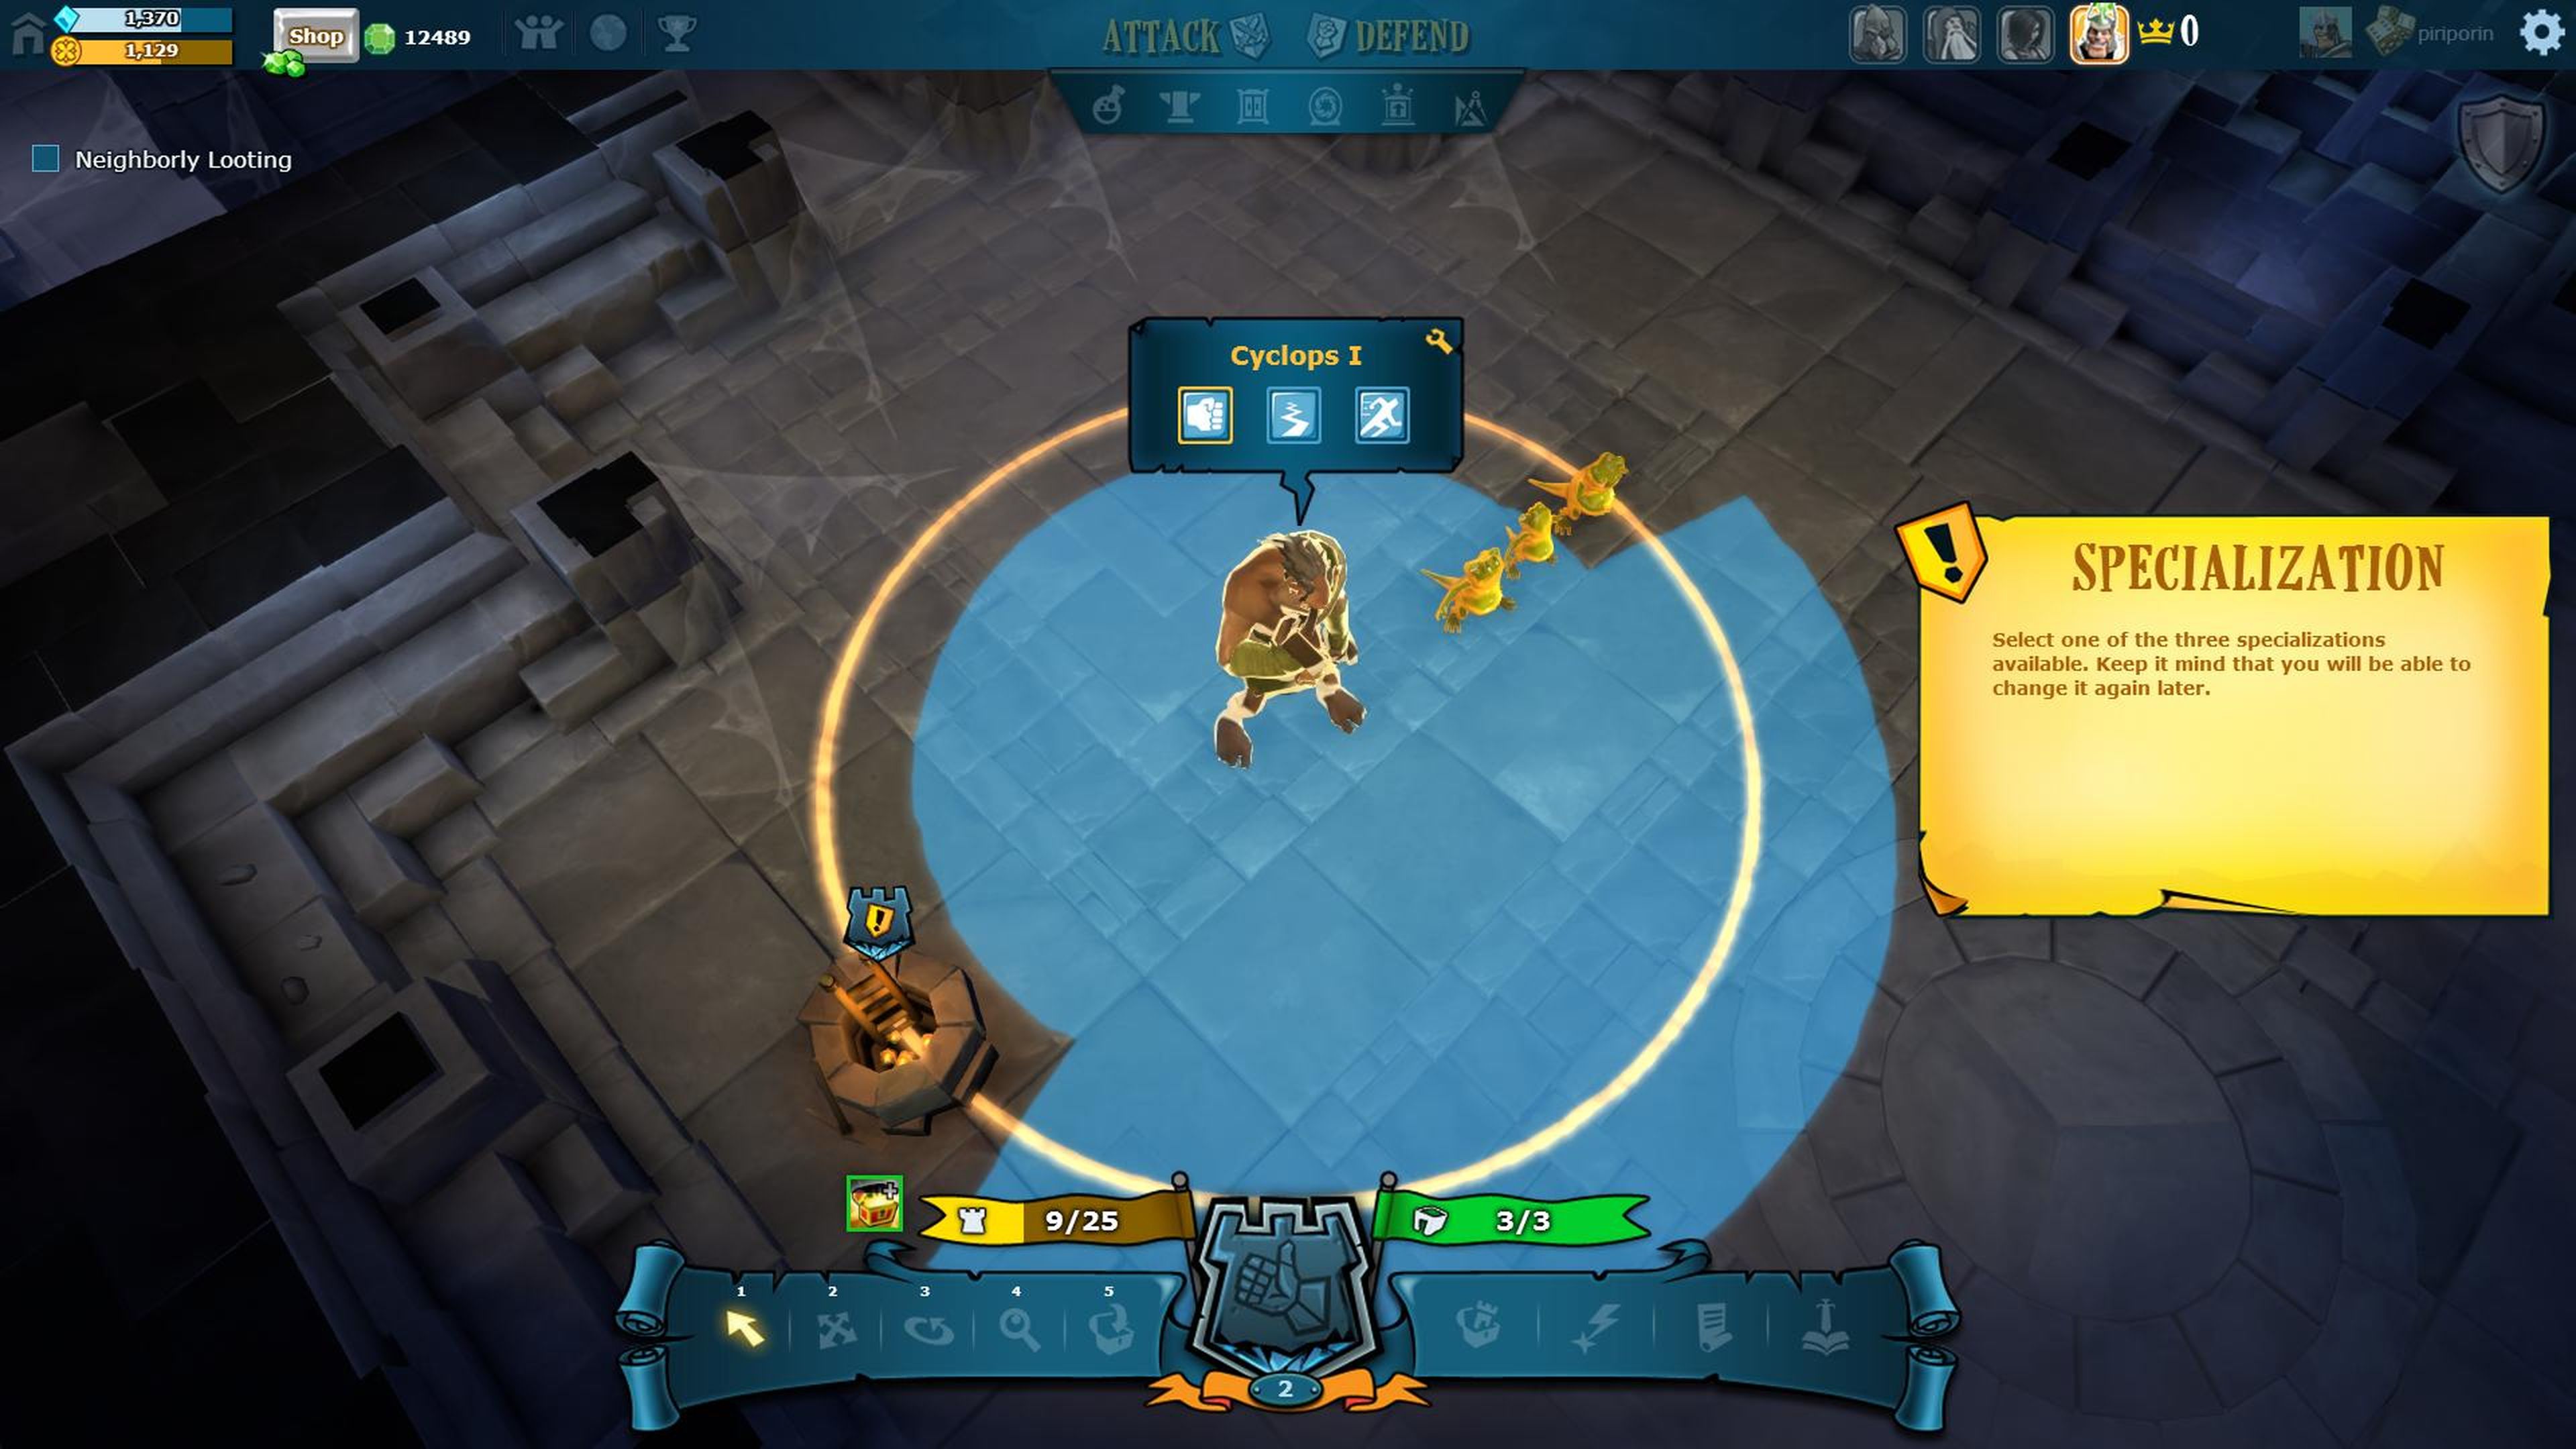 Análisis de The Mighty Quest for Epic Loot para PC